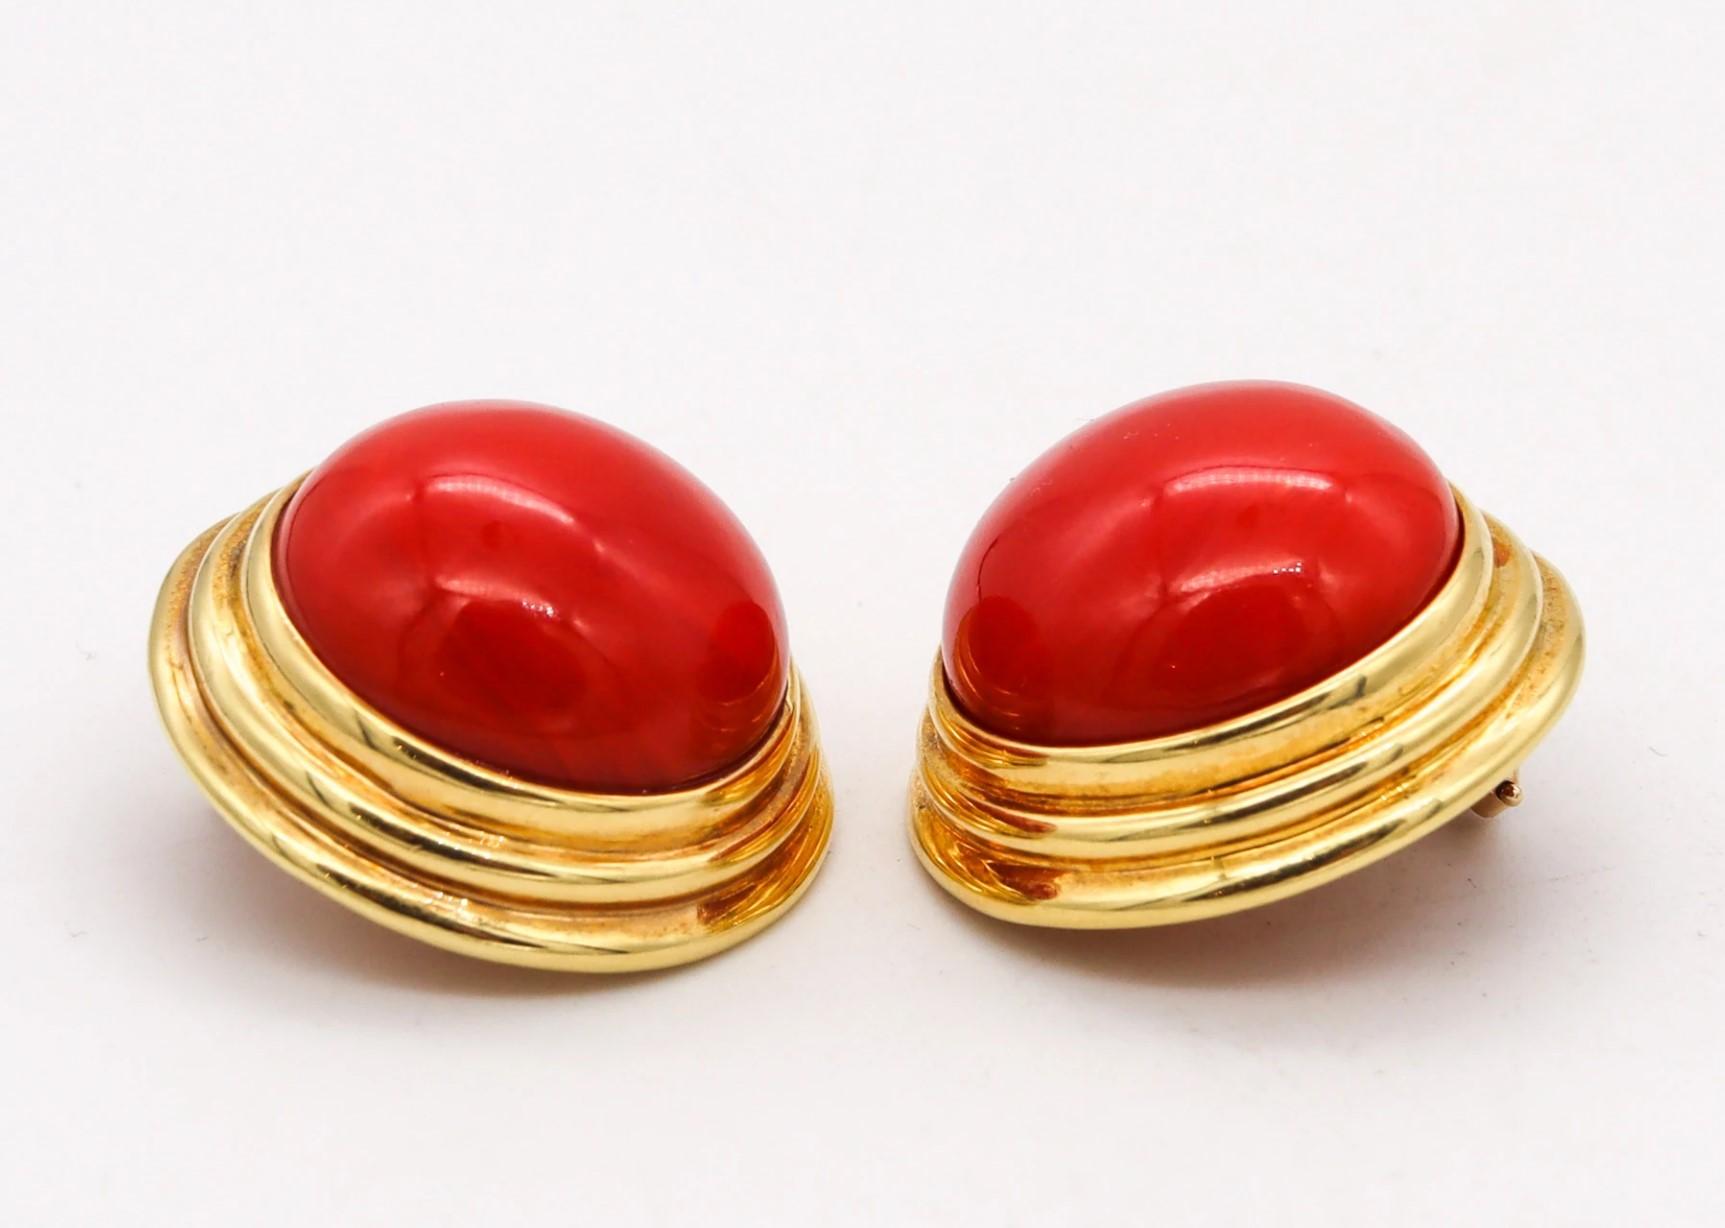 Cellino 1970 Italy Massive Earrings in 18Kt Gold 70.2 Ctw Sardinian Red Coral In Excellent Condition For Sale In Miami, FL